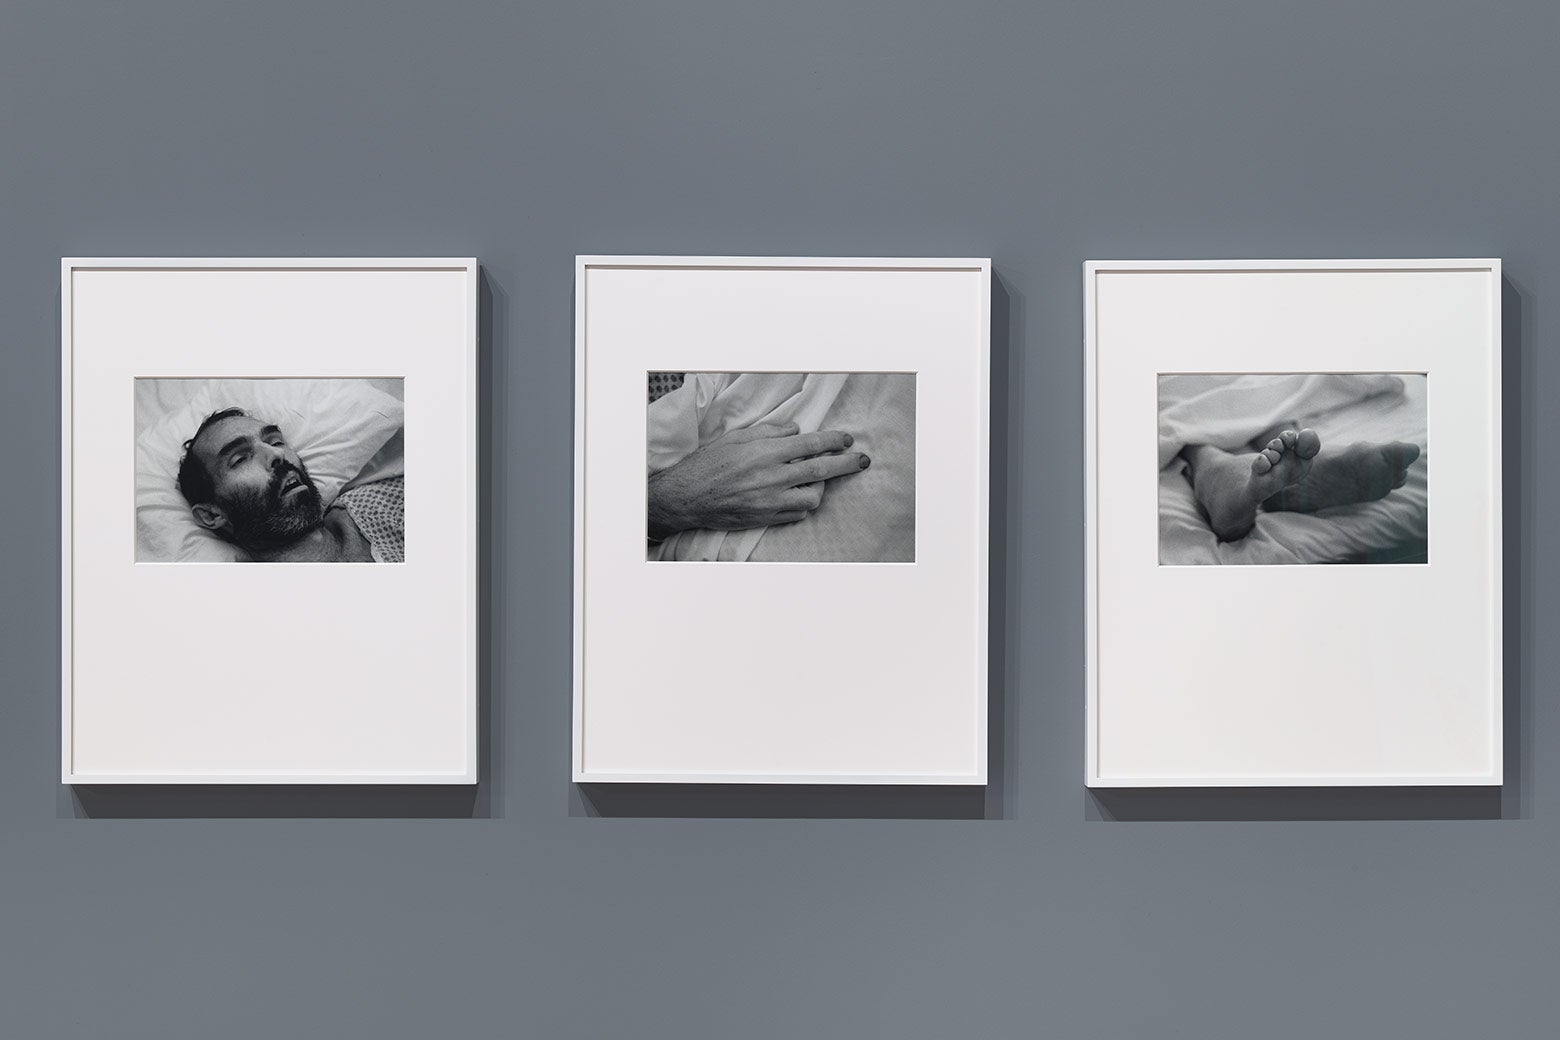 A triptych consisting of photographs of the artist Peter Hujar just after his death.